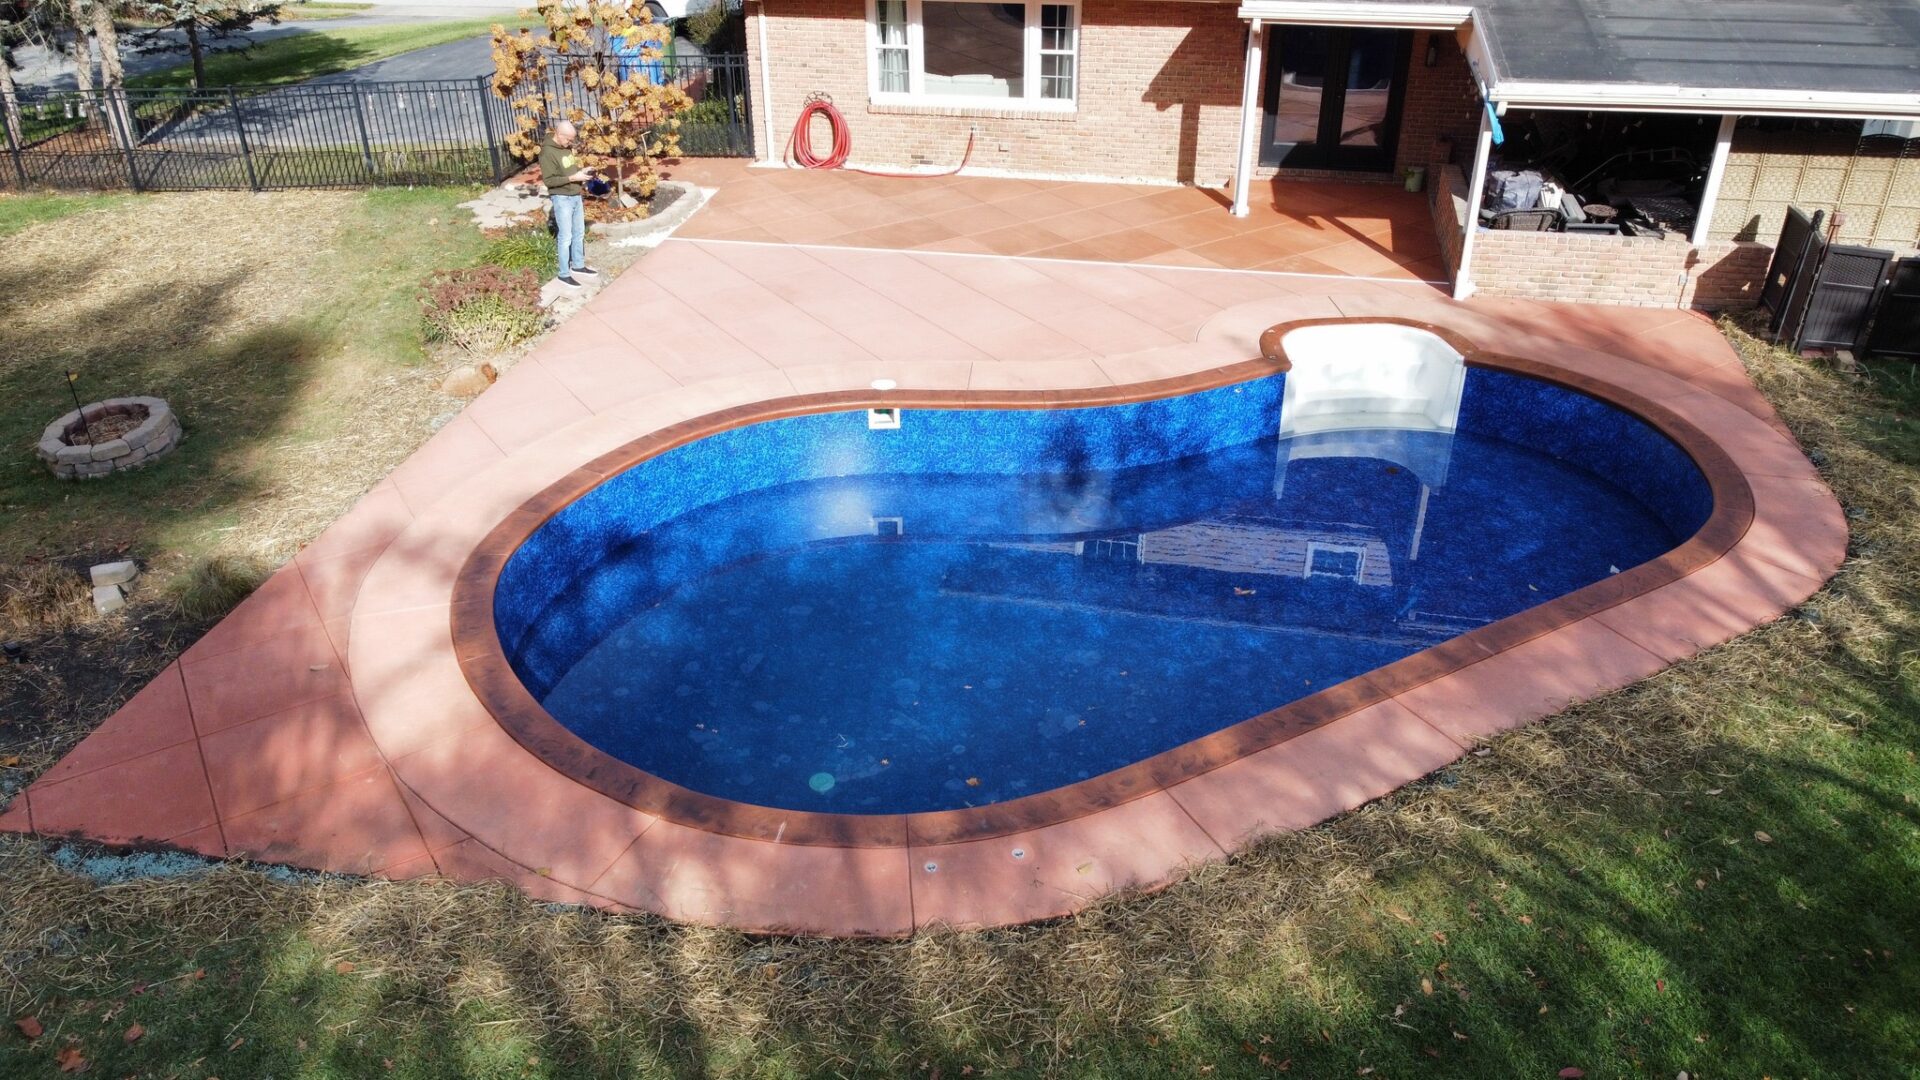 A pool that is in the middle of a yard.